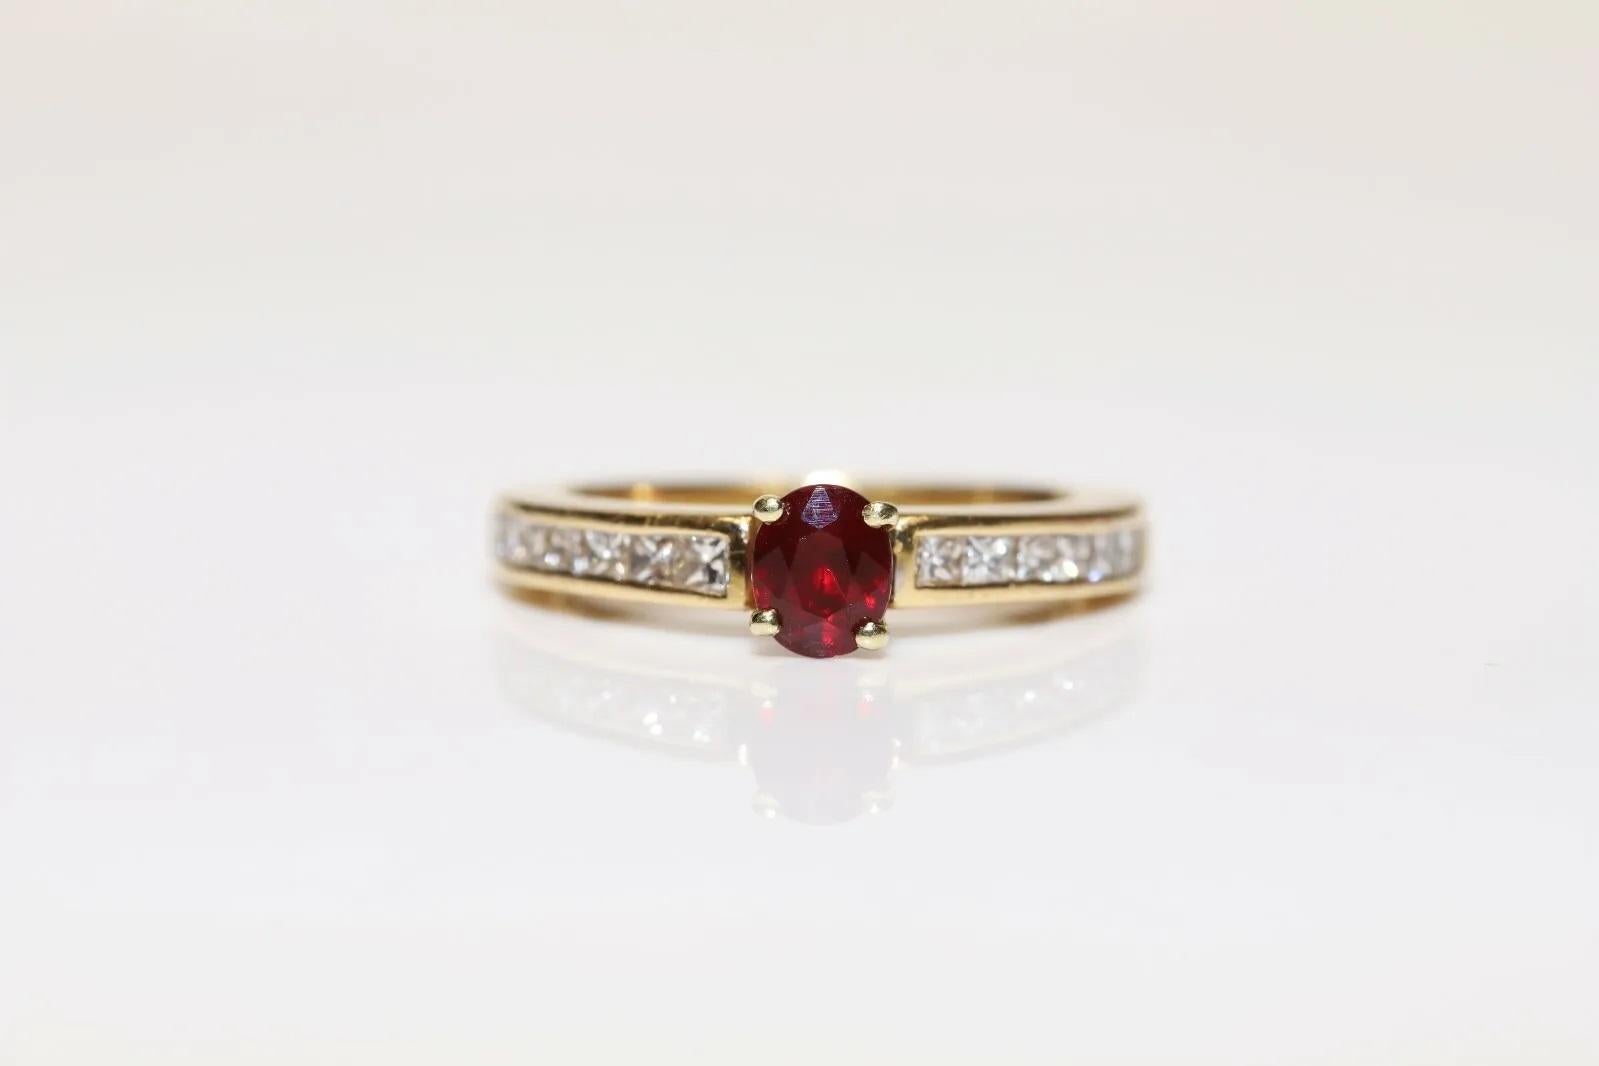 In very good condition.
Total weight is 4.6 grams.
Totally is diamond  0.30 carat.
The diamond is has  G color and vs clarity.
Totally is ruby 0.30 carat.
Ring size is US 5 (We offer free resizing)
Acid tested to be 18k real gold.
We can make any